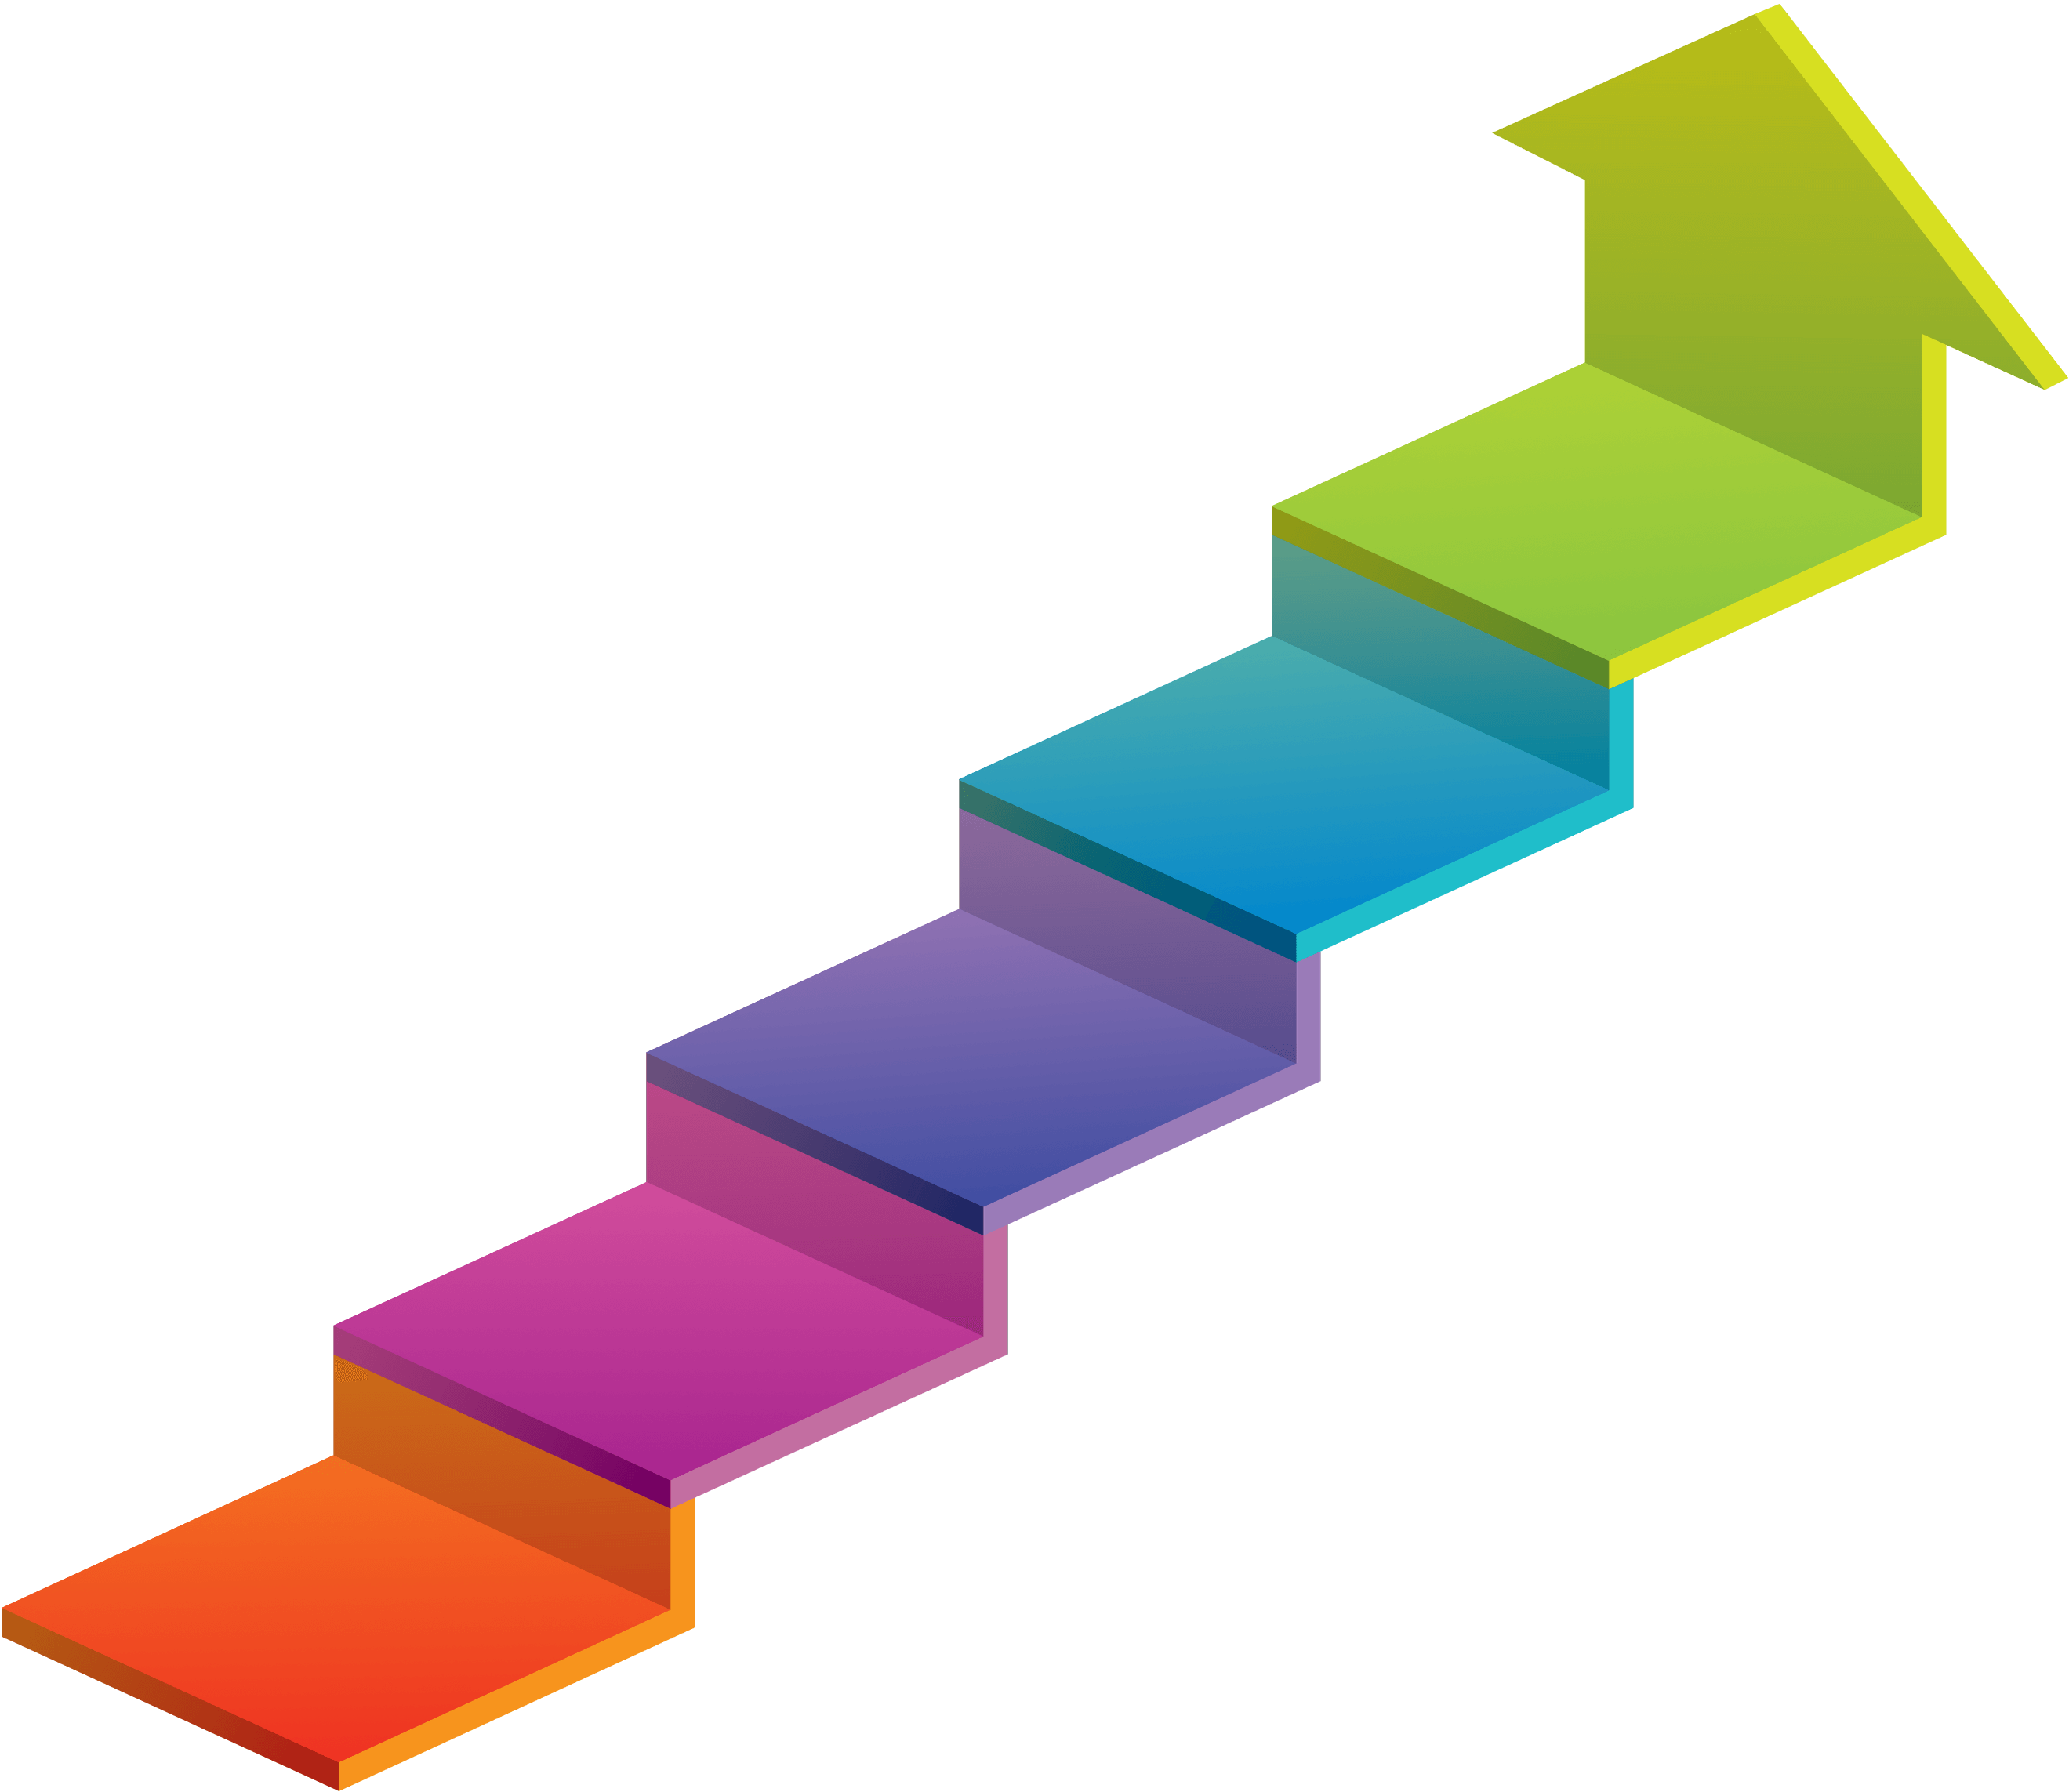 A Colorful Stairs With A Arrow Pointing Up